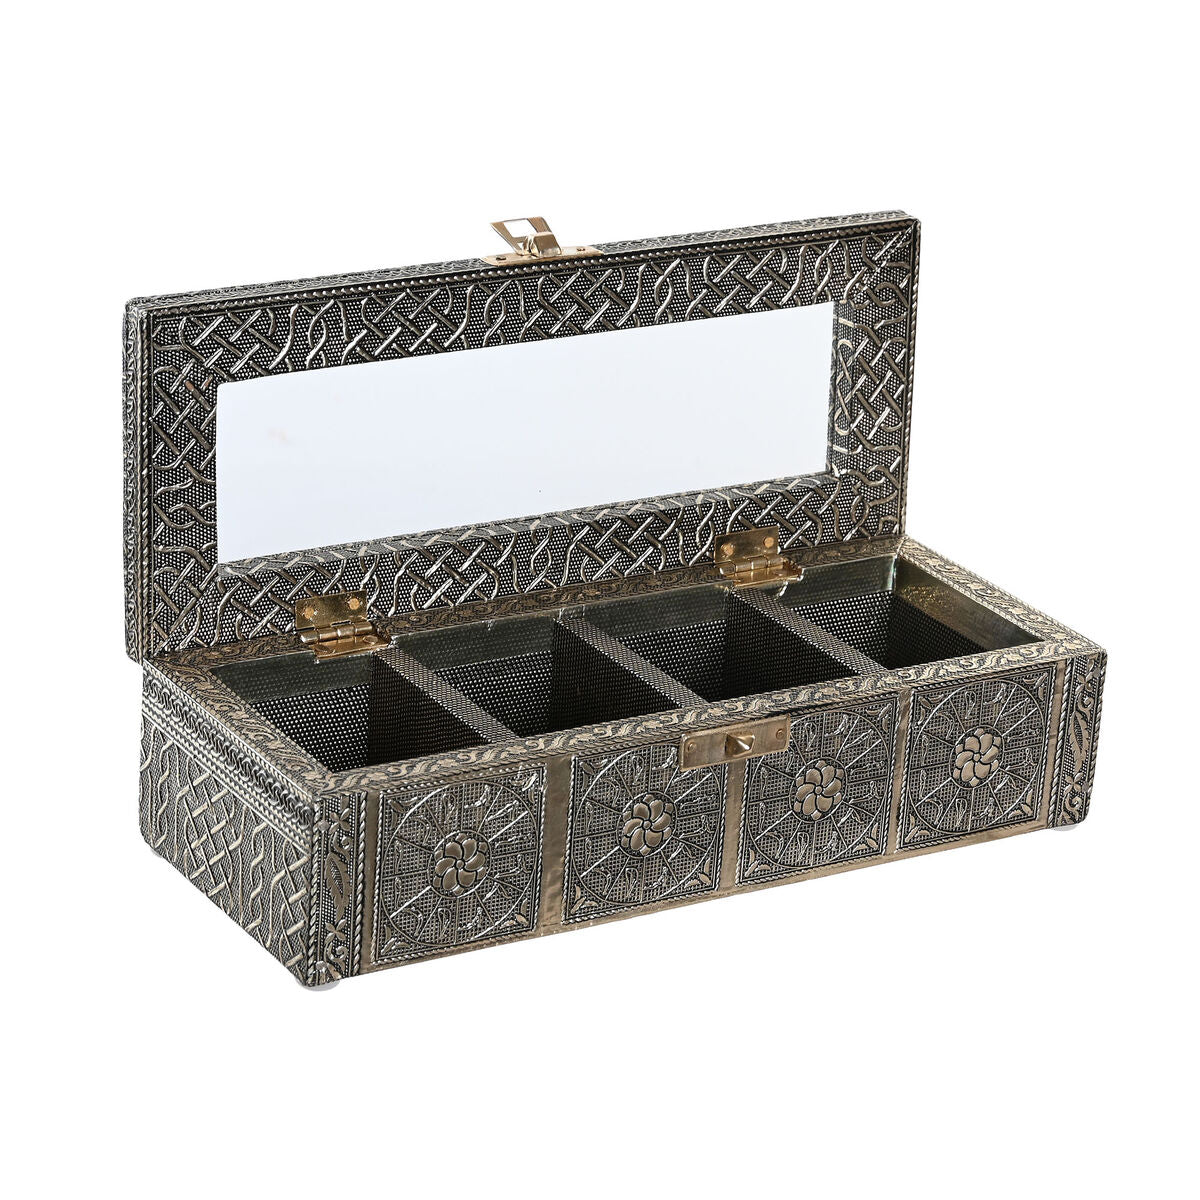 Box for Infusions DKD Home Decor 23 x 9 x 6 cm Champagne Hout Aluminium